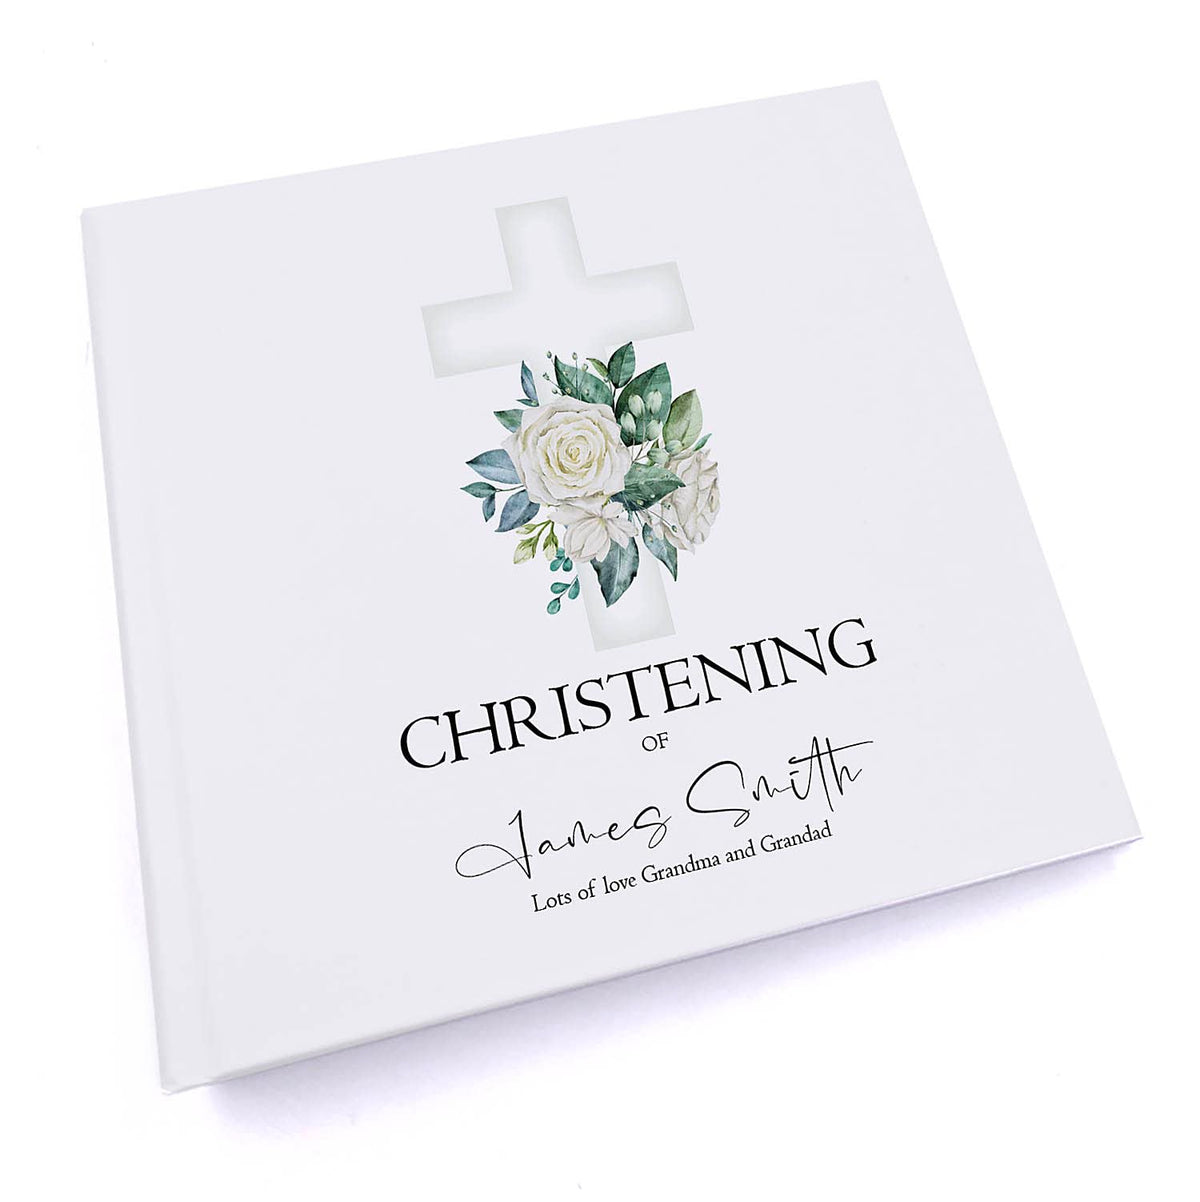 Personalised Christening 6x4" Slip in Photo Album Gift With Green Cross